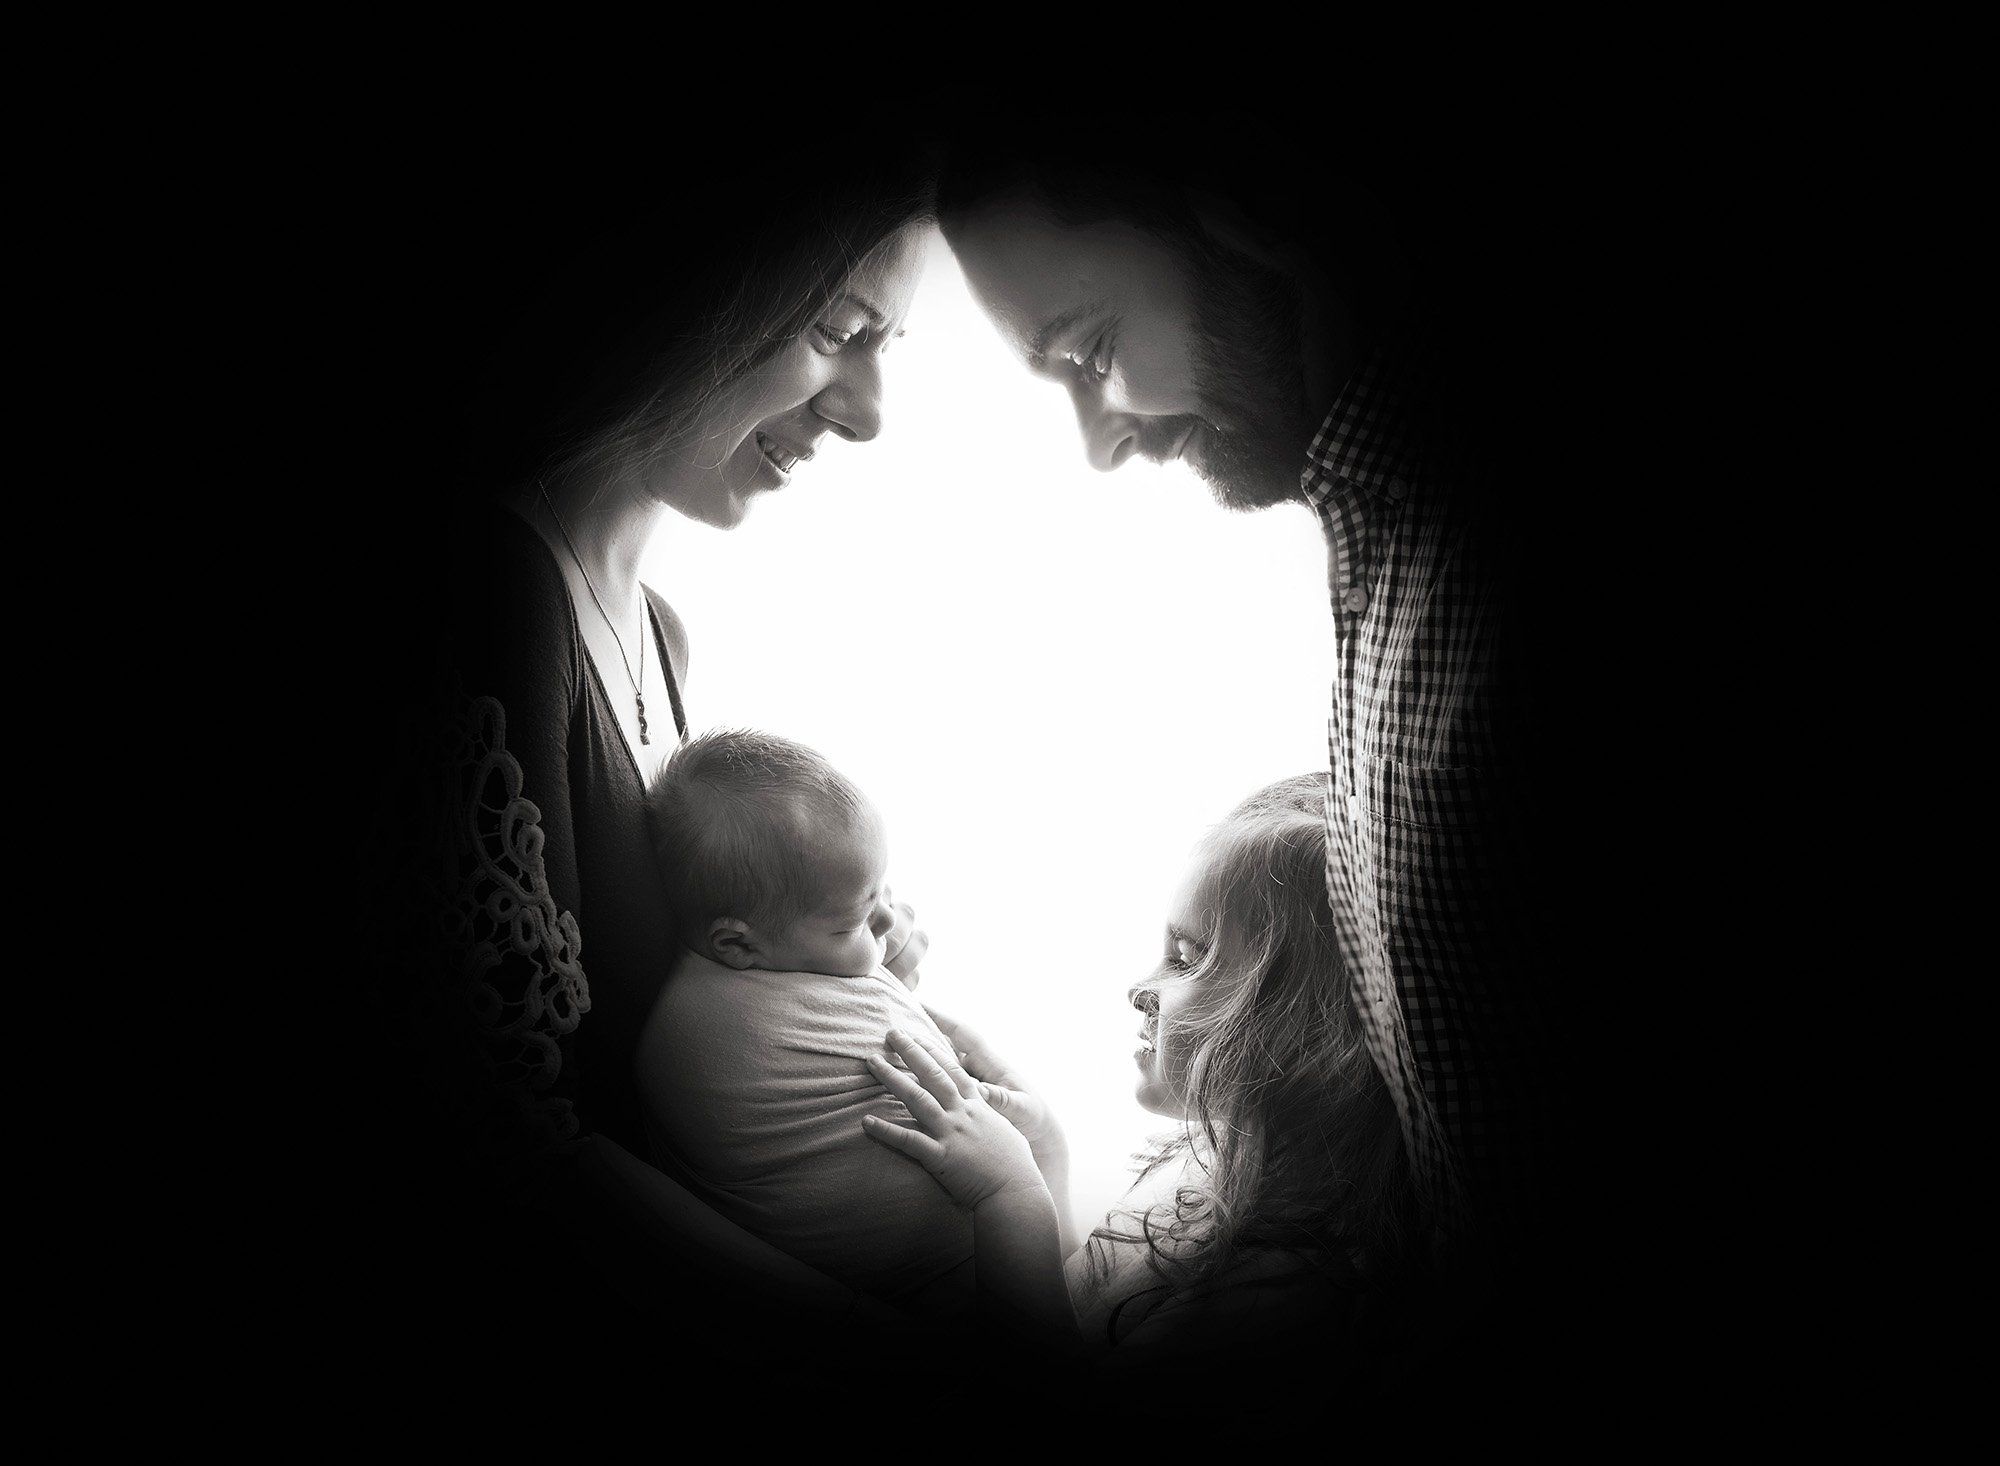 silhouette shadow of parents face's while cradling their newborn baby boy and older sister peaks in